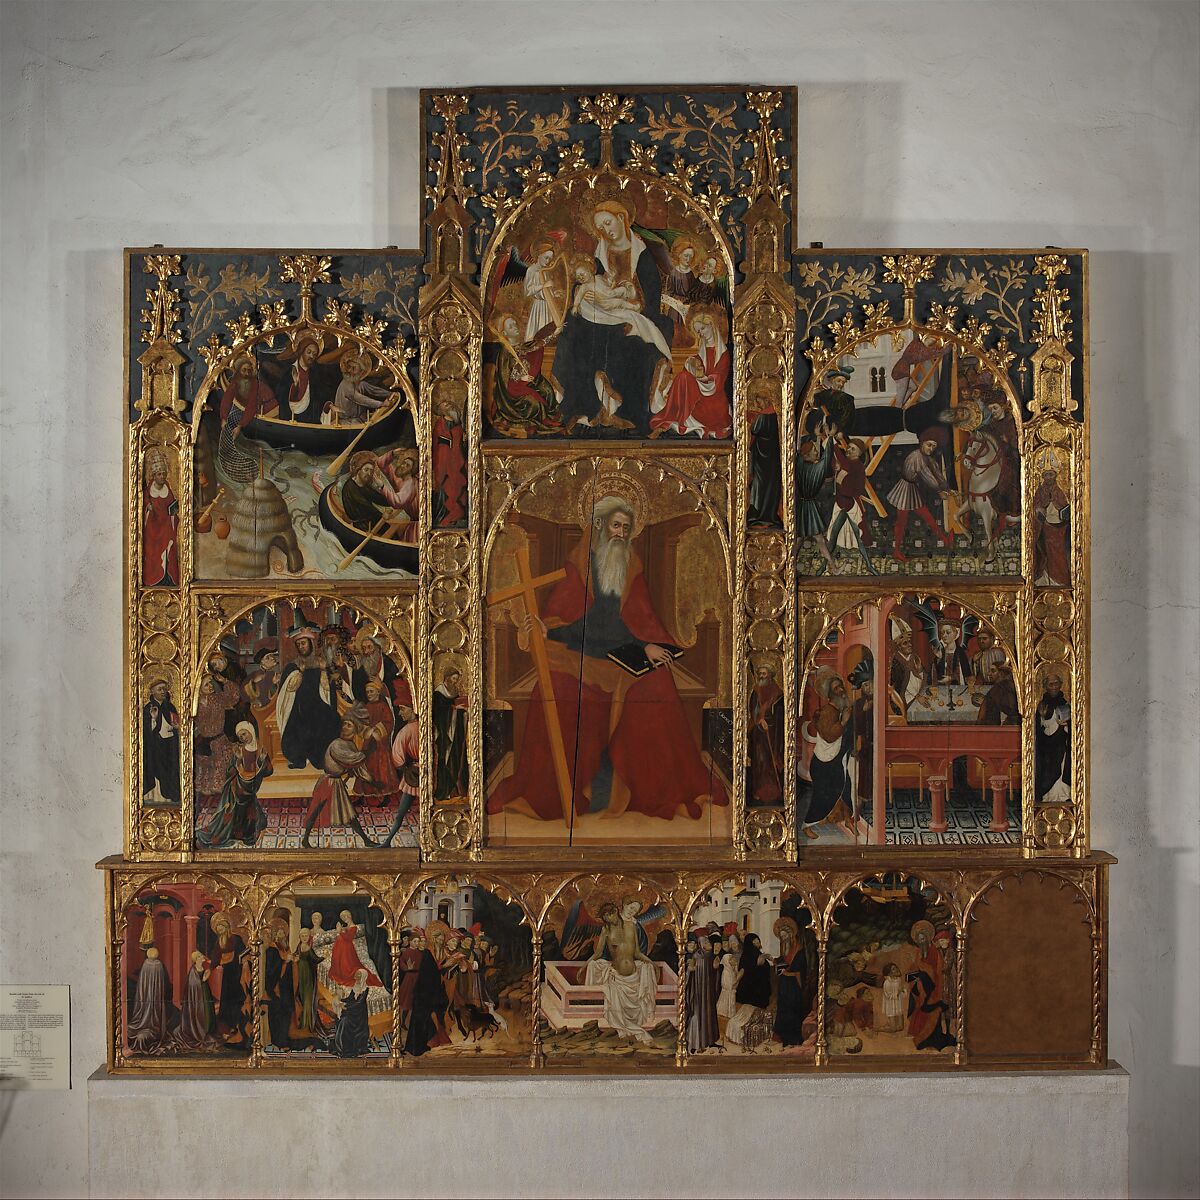 Retable with Scenes from the Life of Saint Andrew, Attributed to the Master of Roussillon (Spanish, active 1385–1428), Tempera and gilding on panel, Catalan 